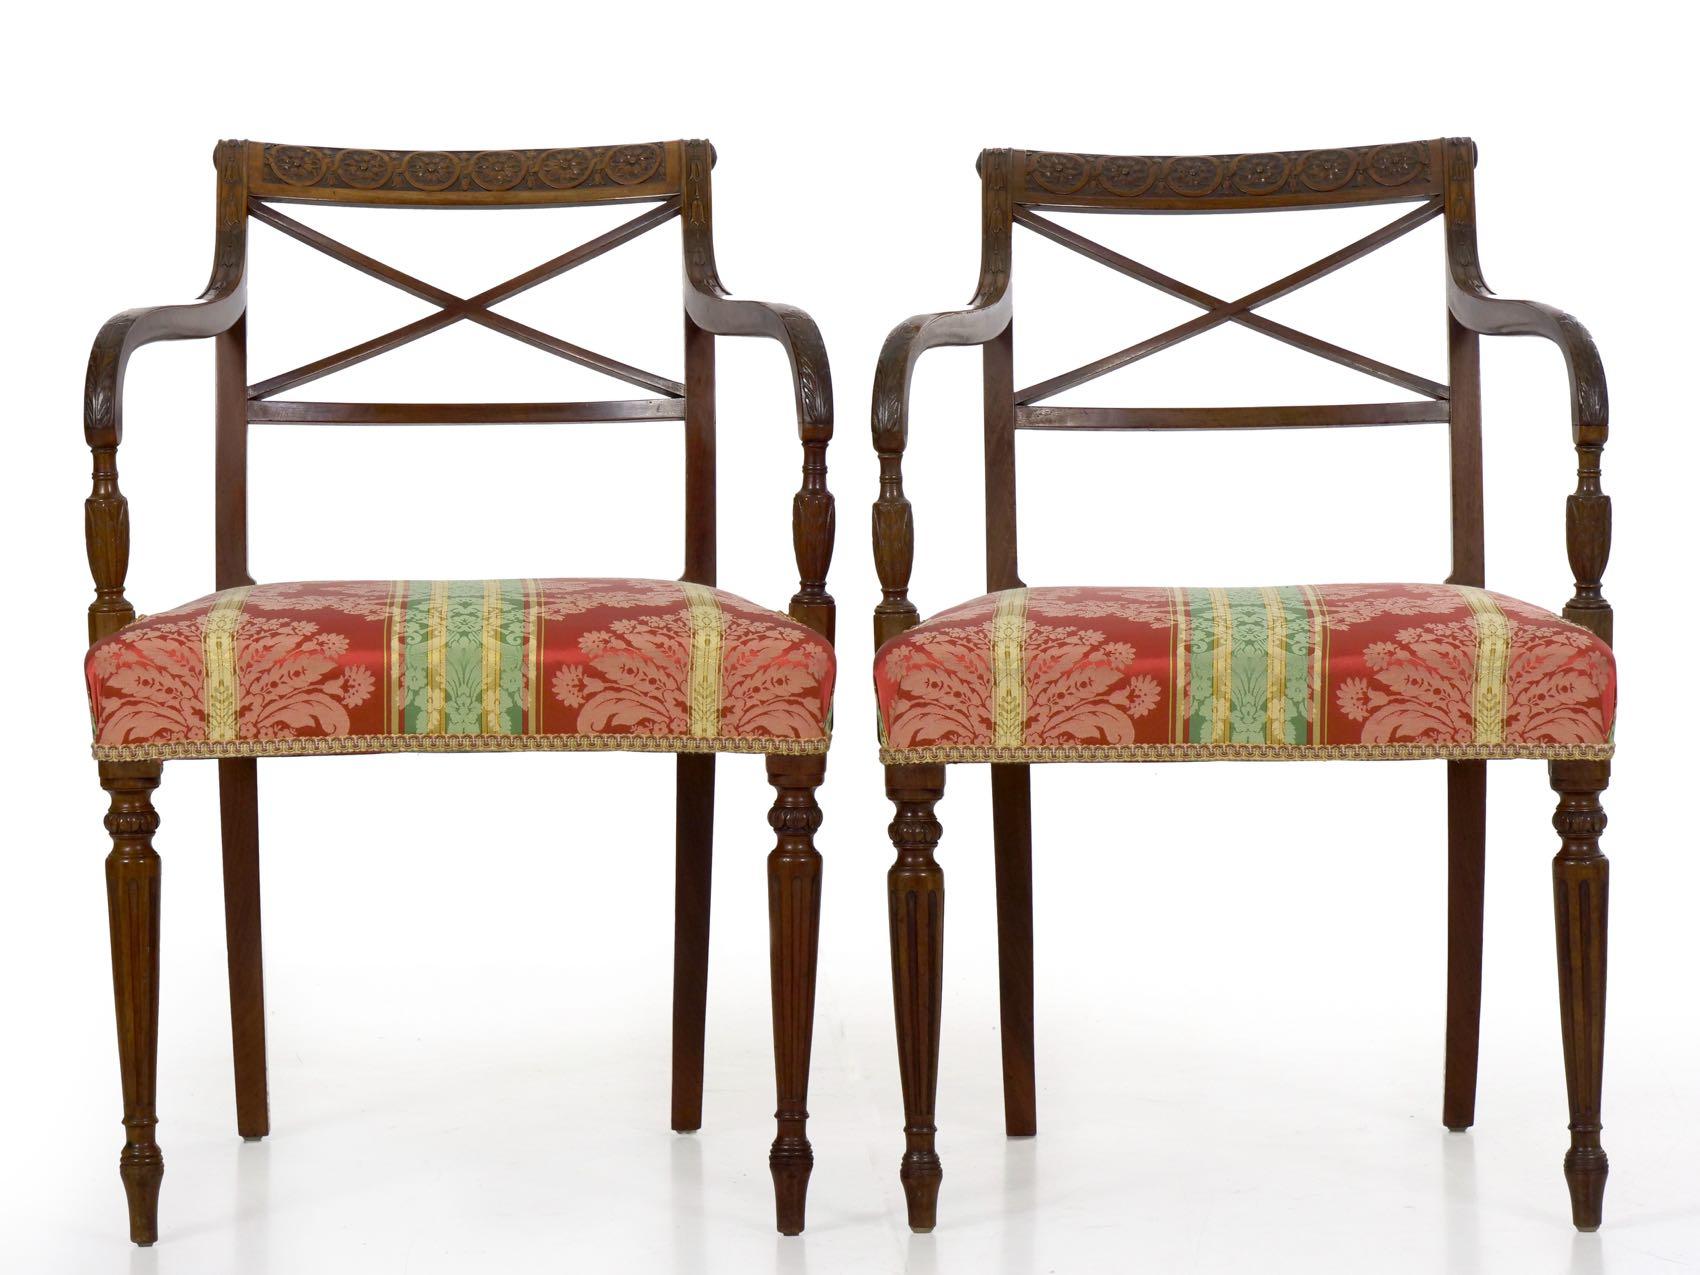 An exquisite set of eight dining chairs from the first quarter of the 19th century, they are crafted of solid and dense grained mahogany throughout all primary surfaces. Note the crisply carved crest rails with motifs of intertwined infinite-rings